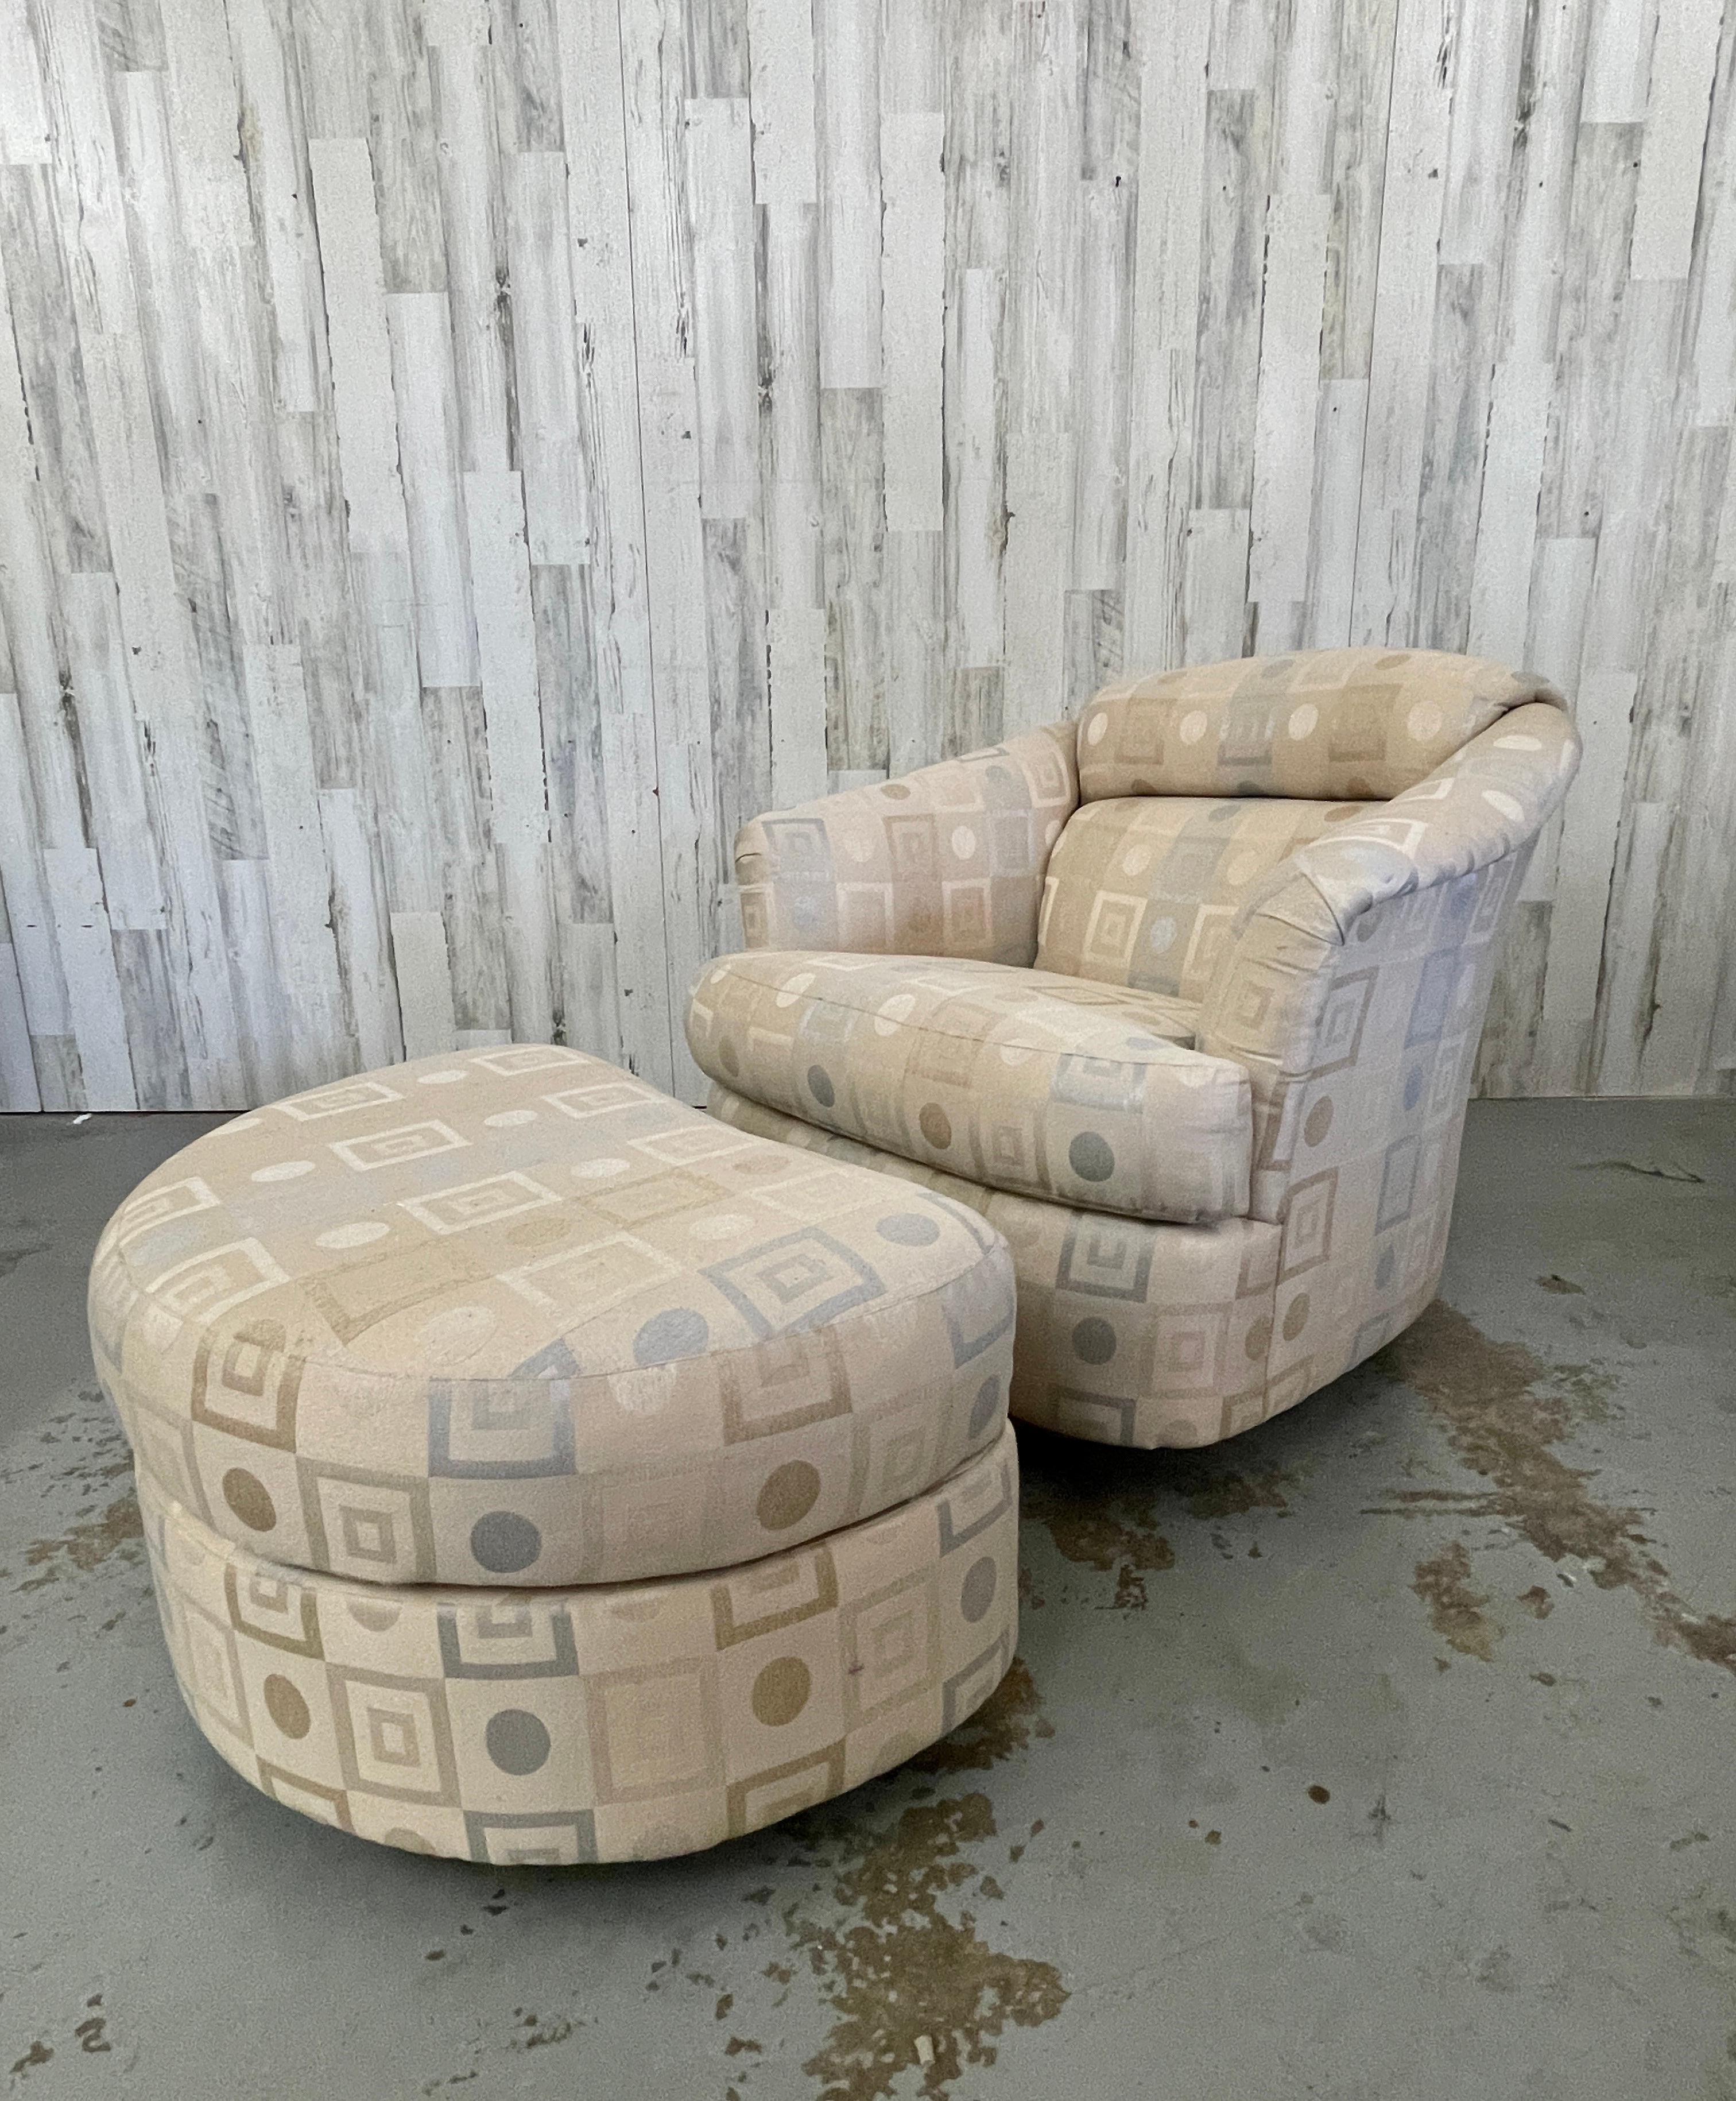 Swivel chair and Ottoman by Milo Baughman for Directional. Swivel and rocking chair with a ottoman on castors. Original label attached. Ottoman measures: 29 W x 20.5 D x 16.25 H.